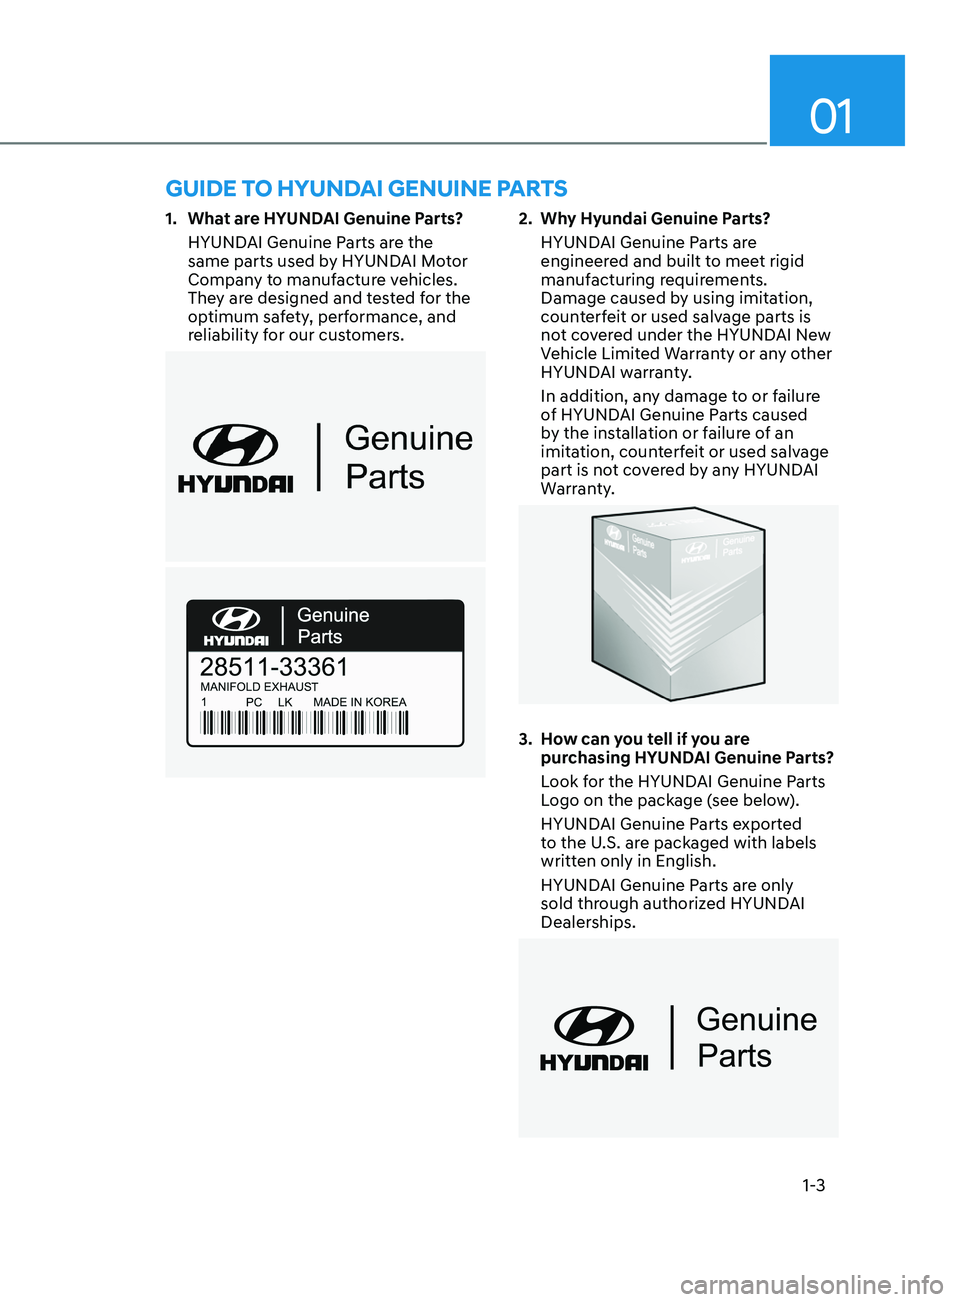 HYUNDAI ELANTRA SEL 2021  Owners Manual 01
1-3
1. What are HYUNDAI Genuine Parts?
HYUNDAI Genuine Parts are the 
same parts used by HYUNDAI Motor 
Company to manufacture vehicles. 
They are designed and tested for the 
optimum safety, perfo